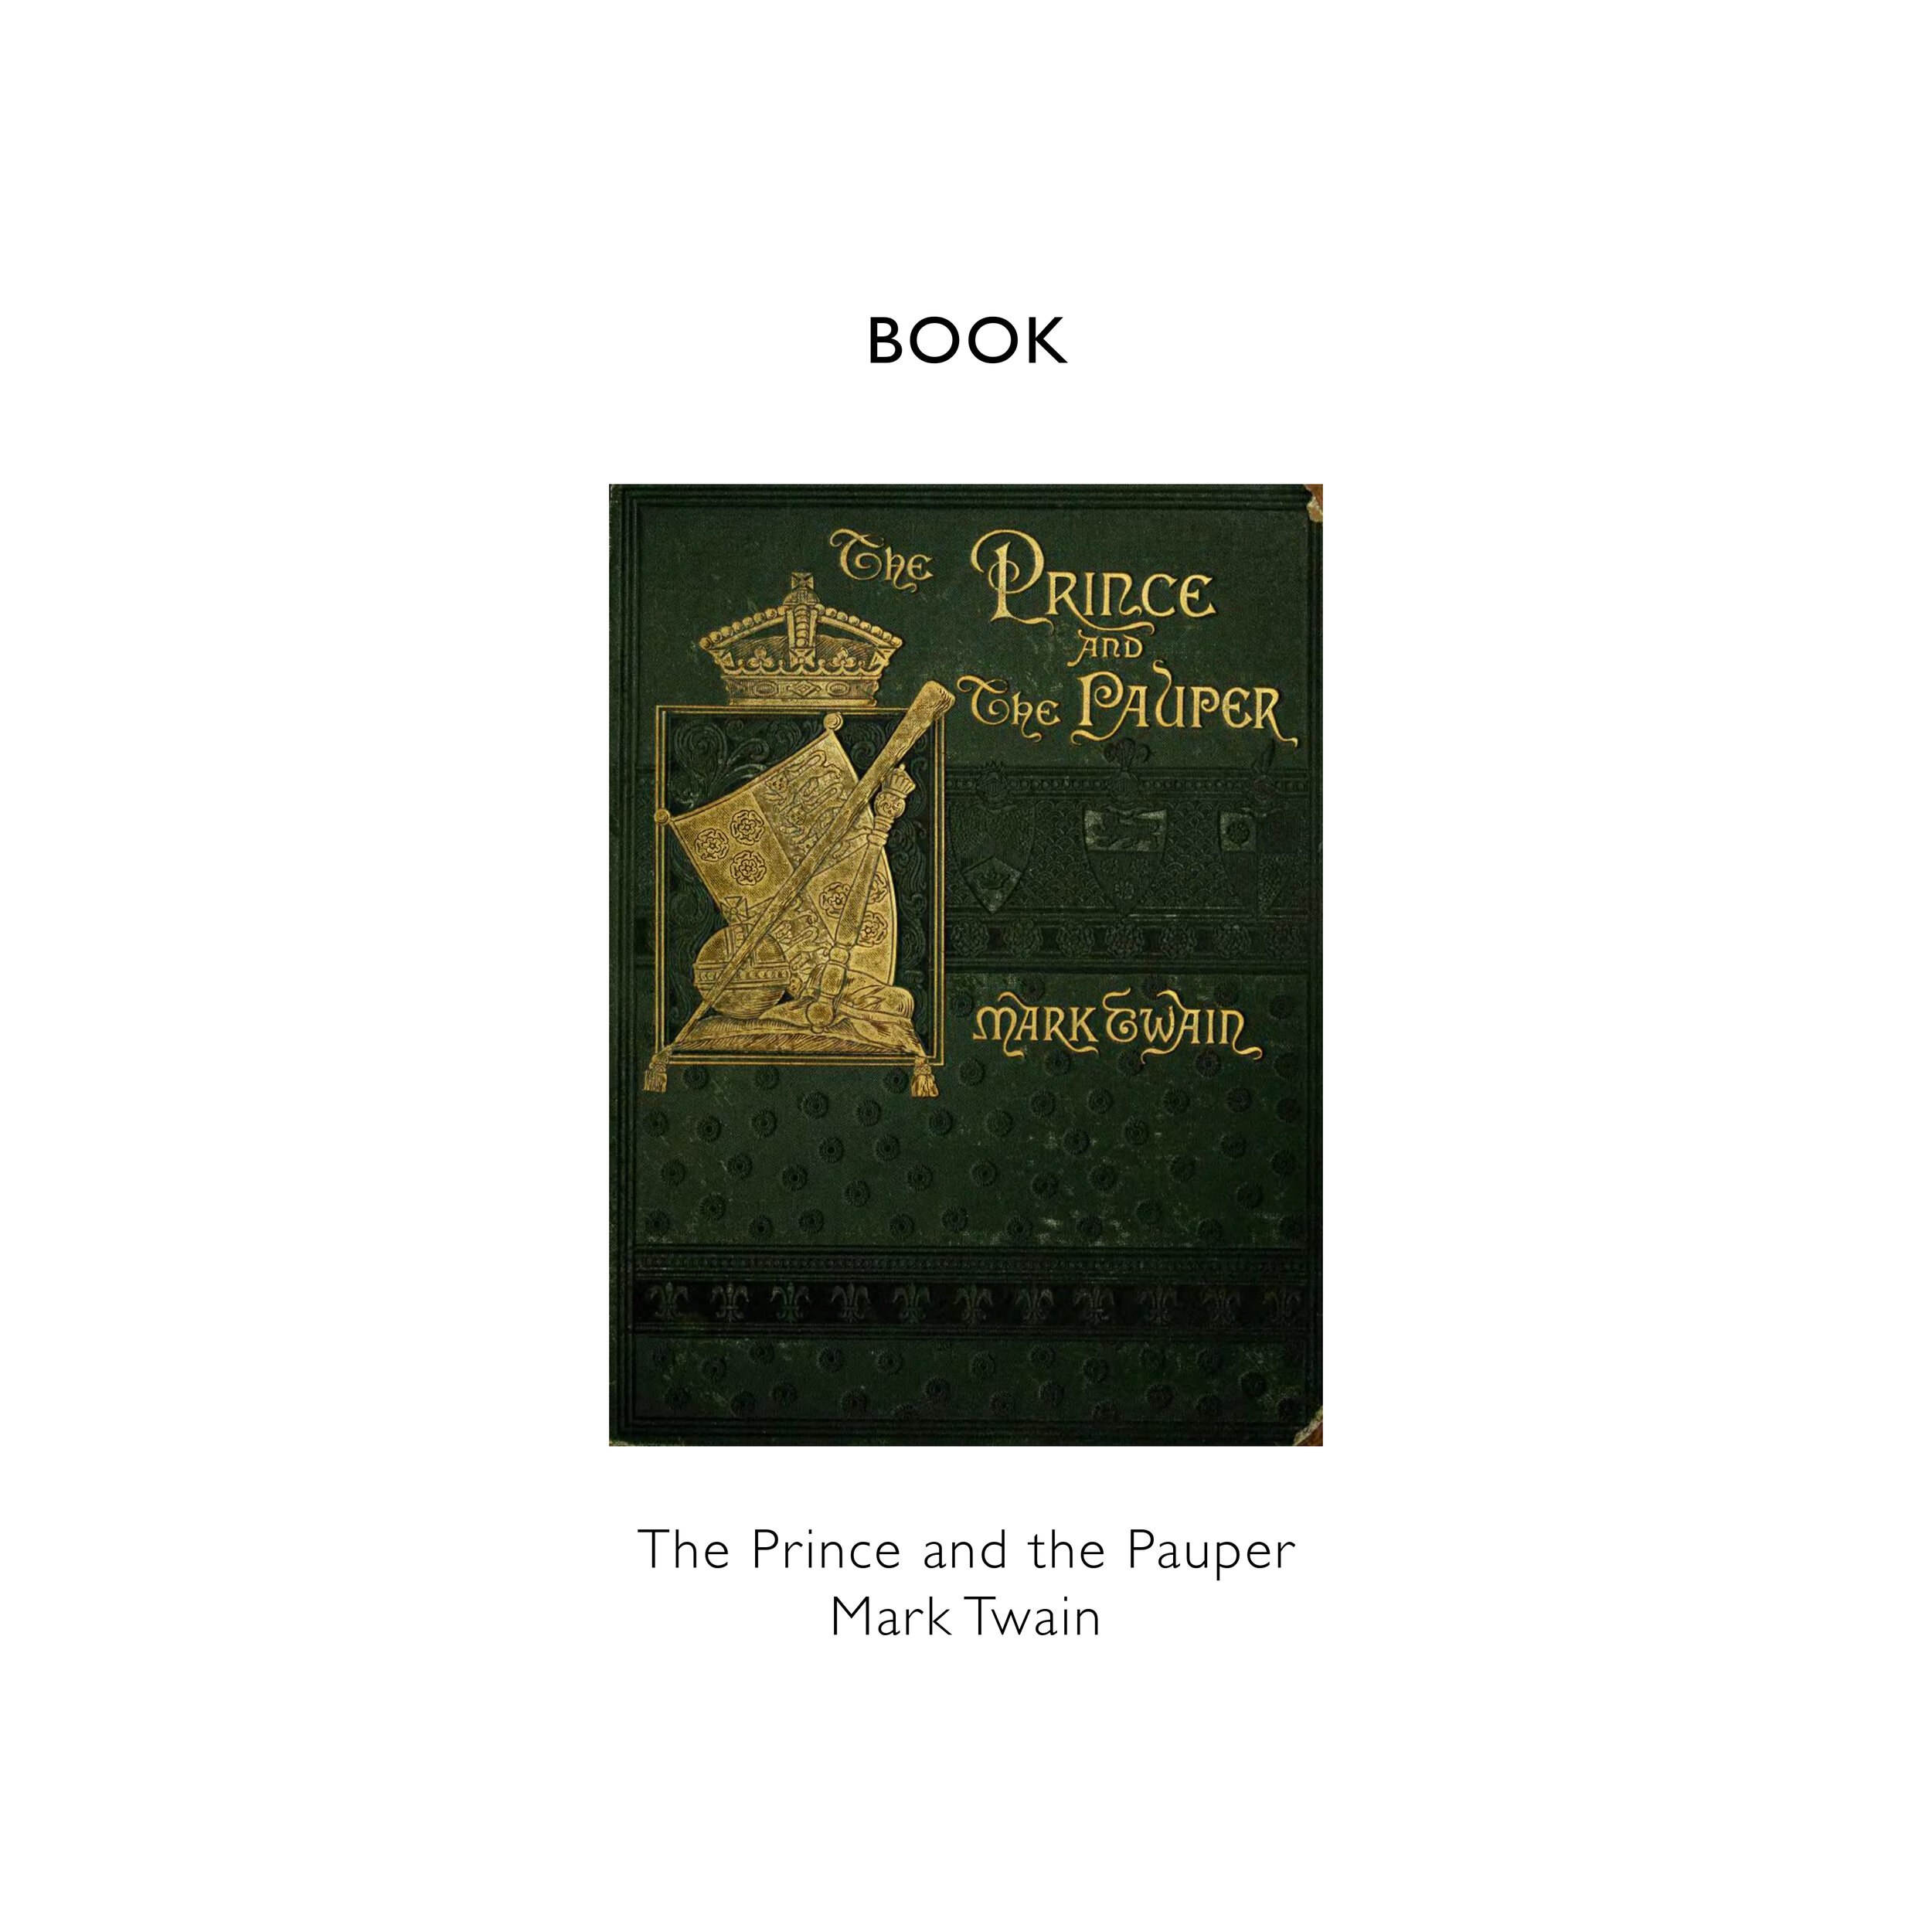 REFERENCE BLOG TEMPLATE The Prince and the Pauper Mark Twain  copy.jpg